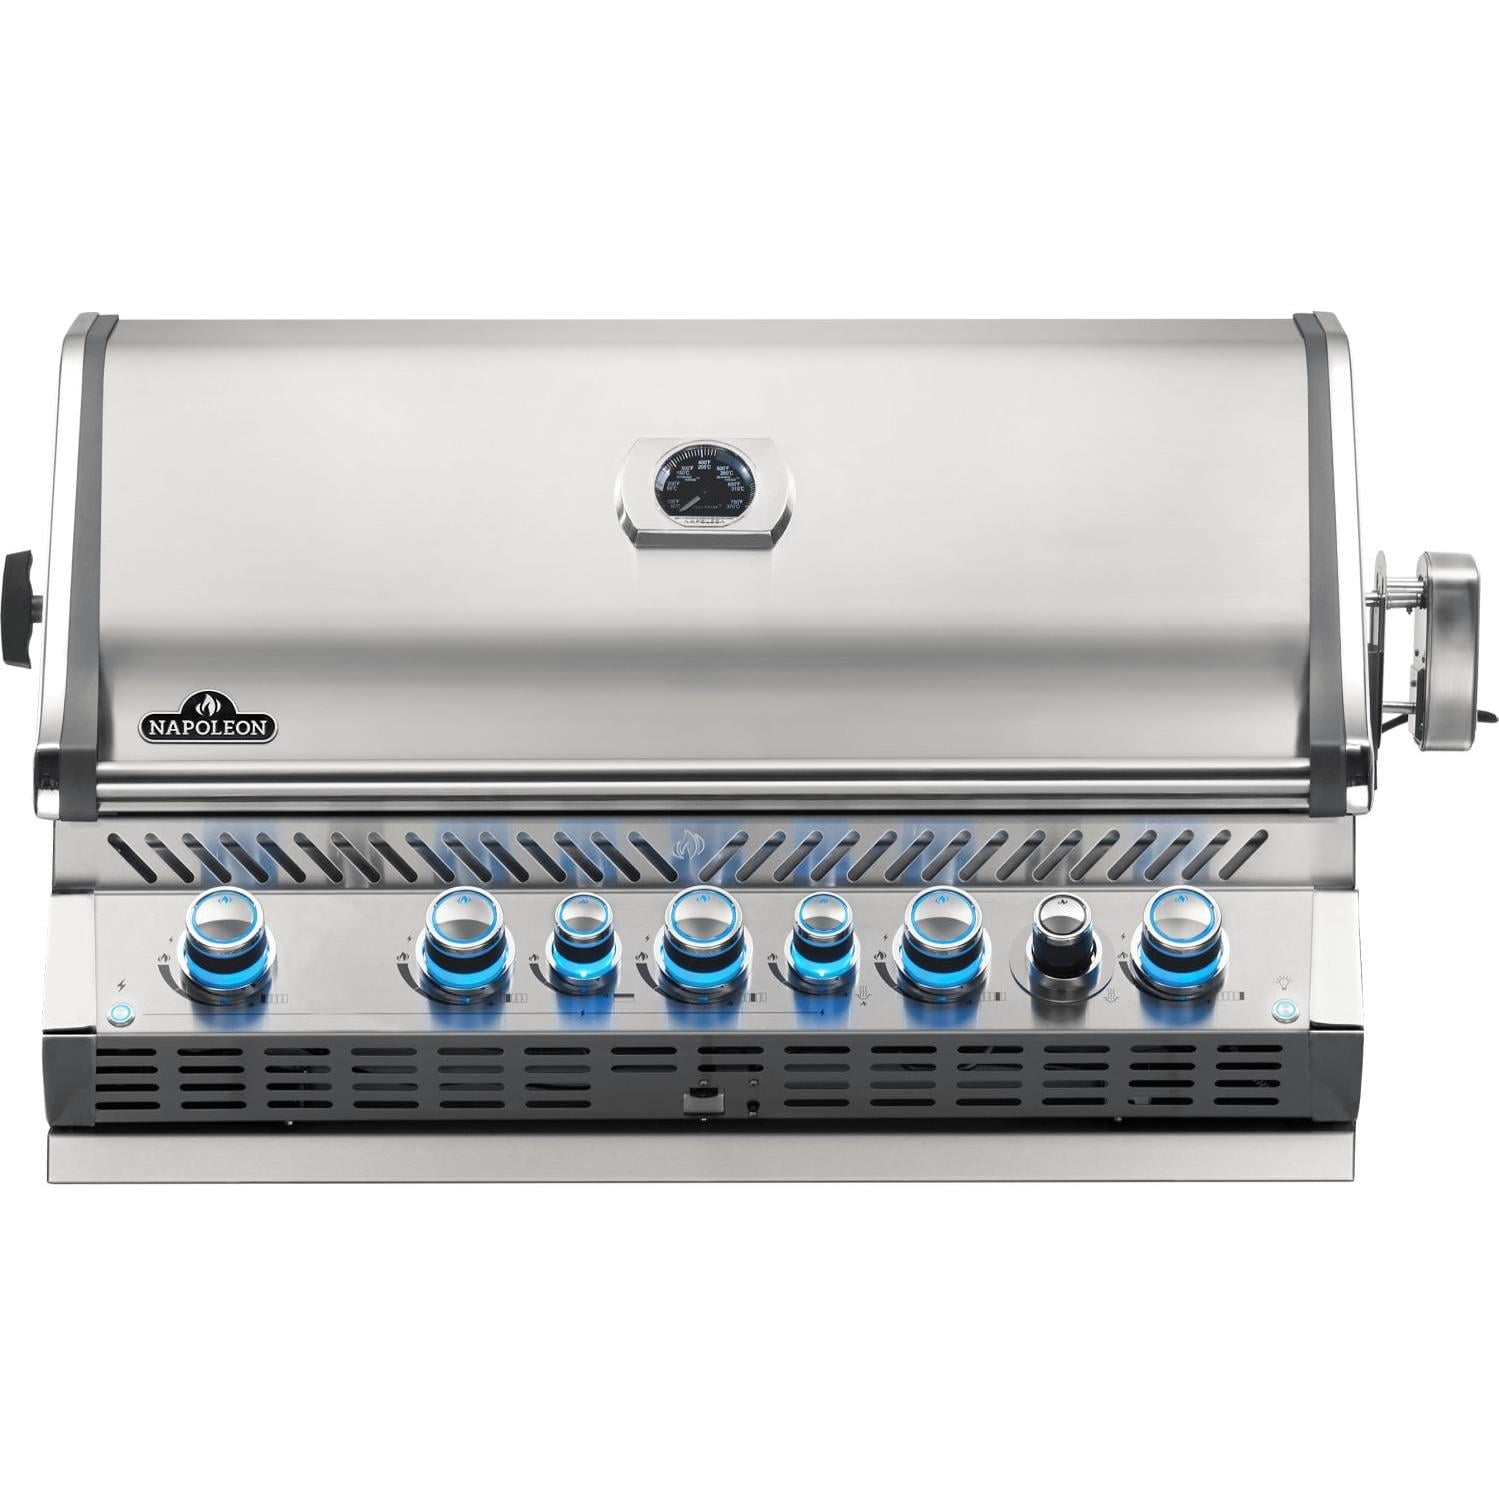 Napoleon Prestige Pro 665 Built-in Propane Gas Grill With Infrared Rear Burner - image 1 of 6